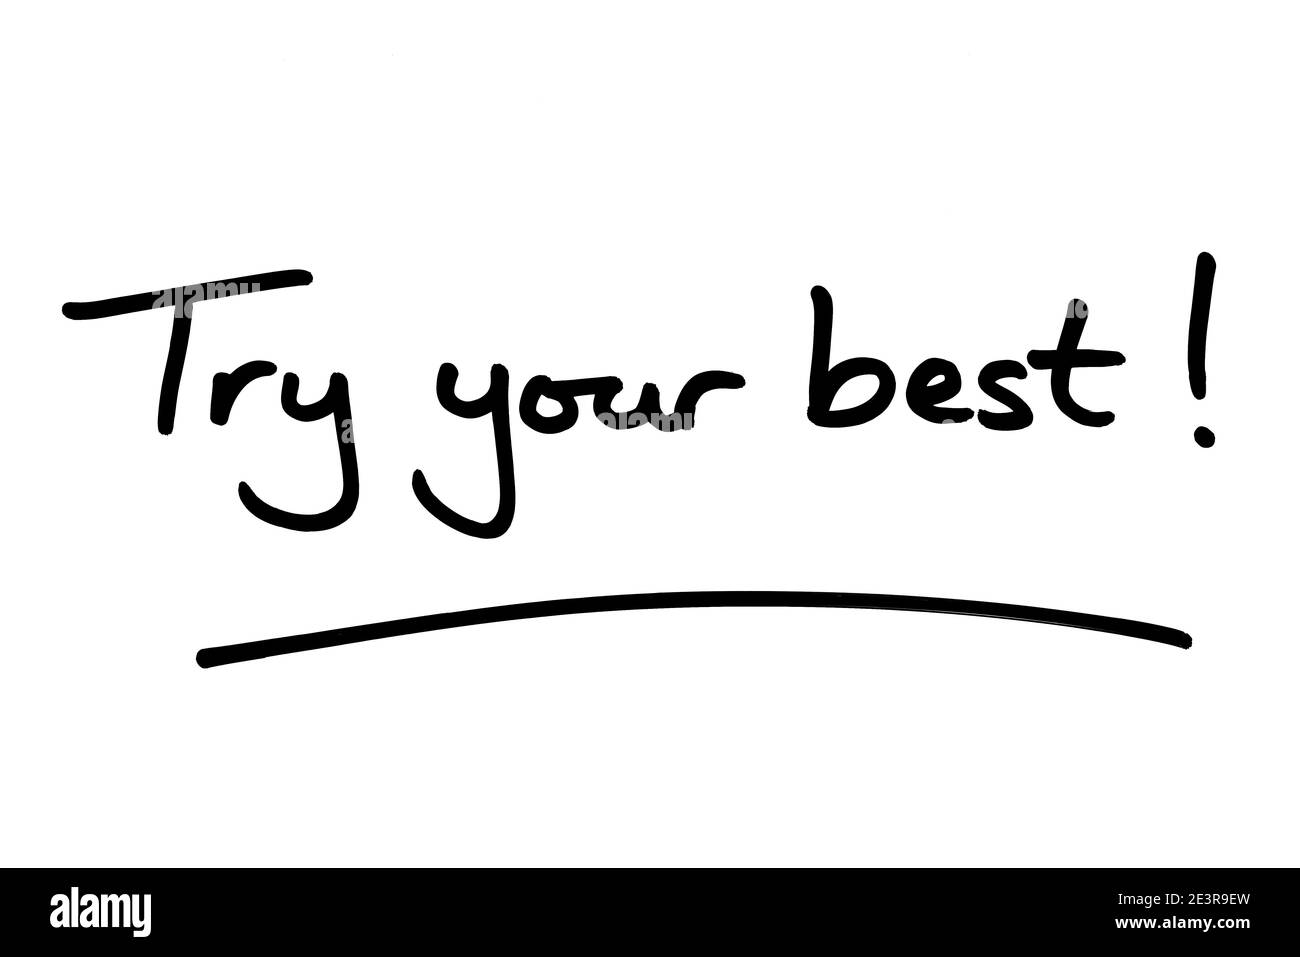 Try your best! handwritten on a white background. Stock Photo